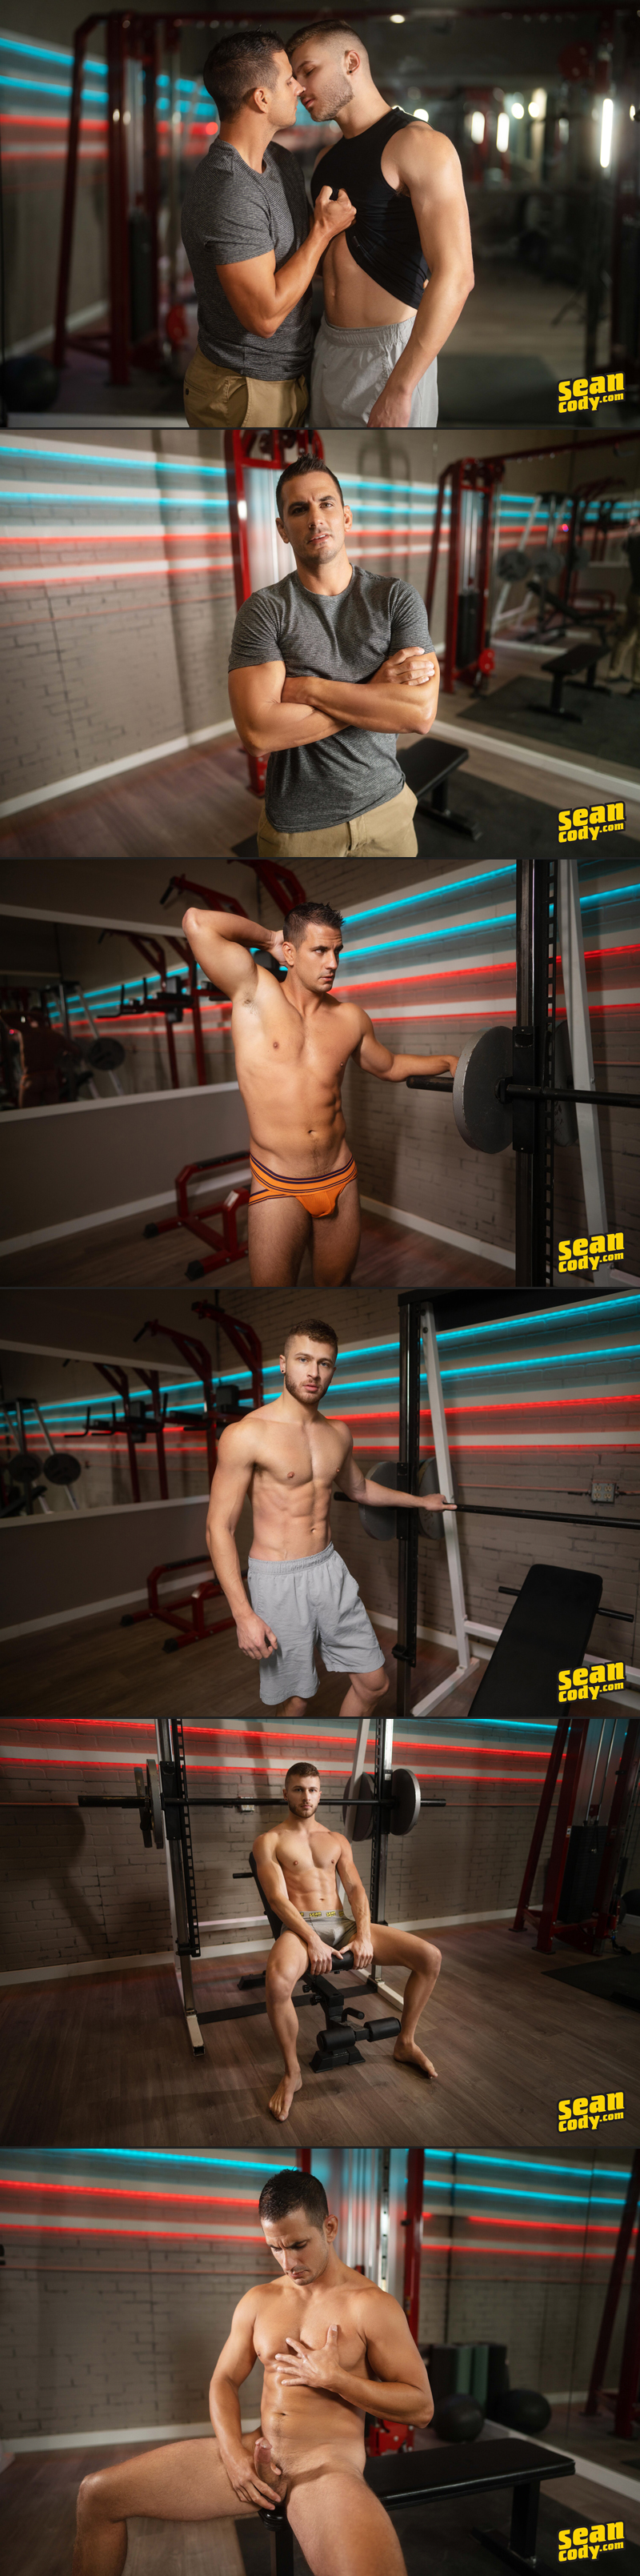 The Gym: Episode 2 (Lachlan and Devy Flip-Fuck) at SeanCody